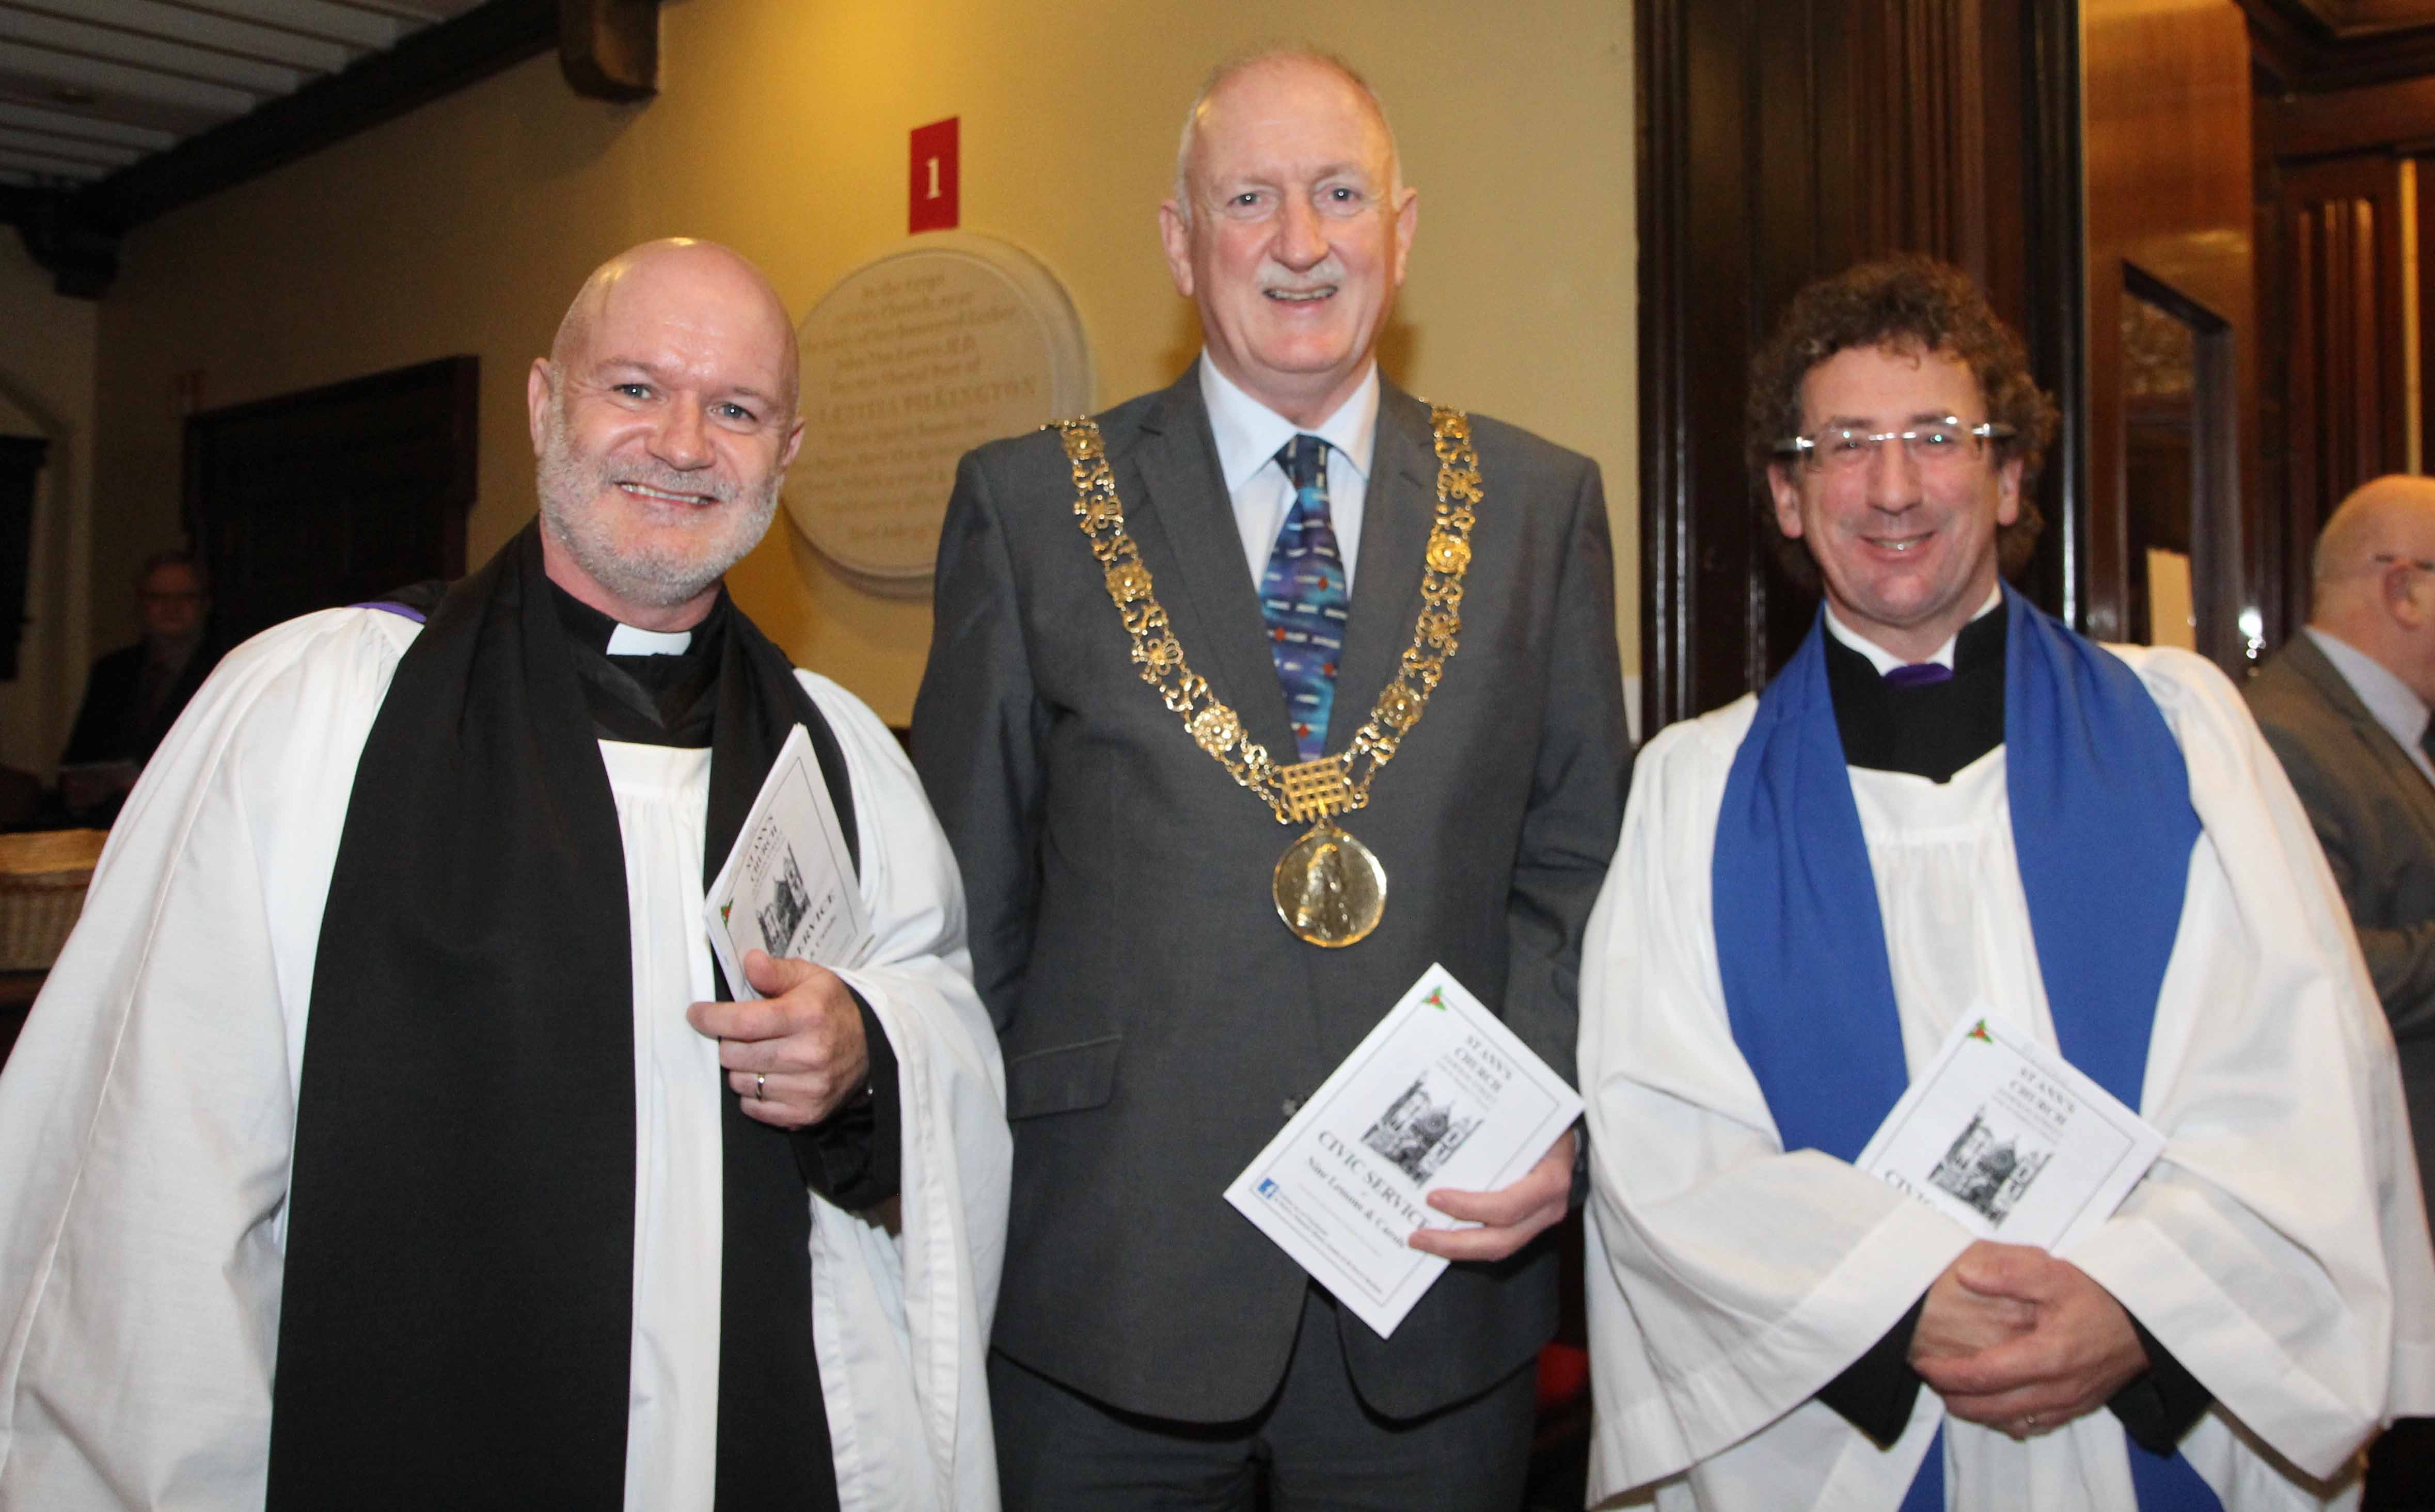 Canon David Gillespie, Lord Mayor of Dublin Nial Ring and Alistair Doyle at the Civic Carol Service in St Ann's, Dawson Street.